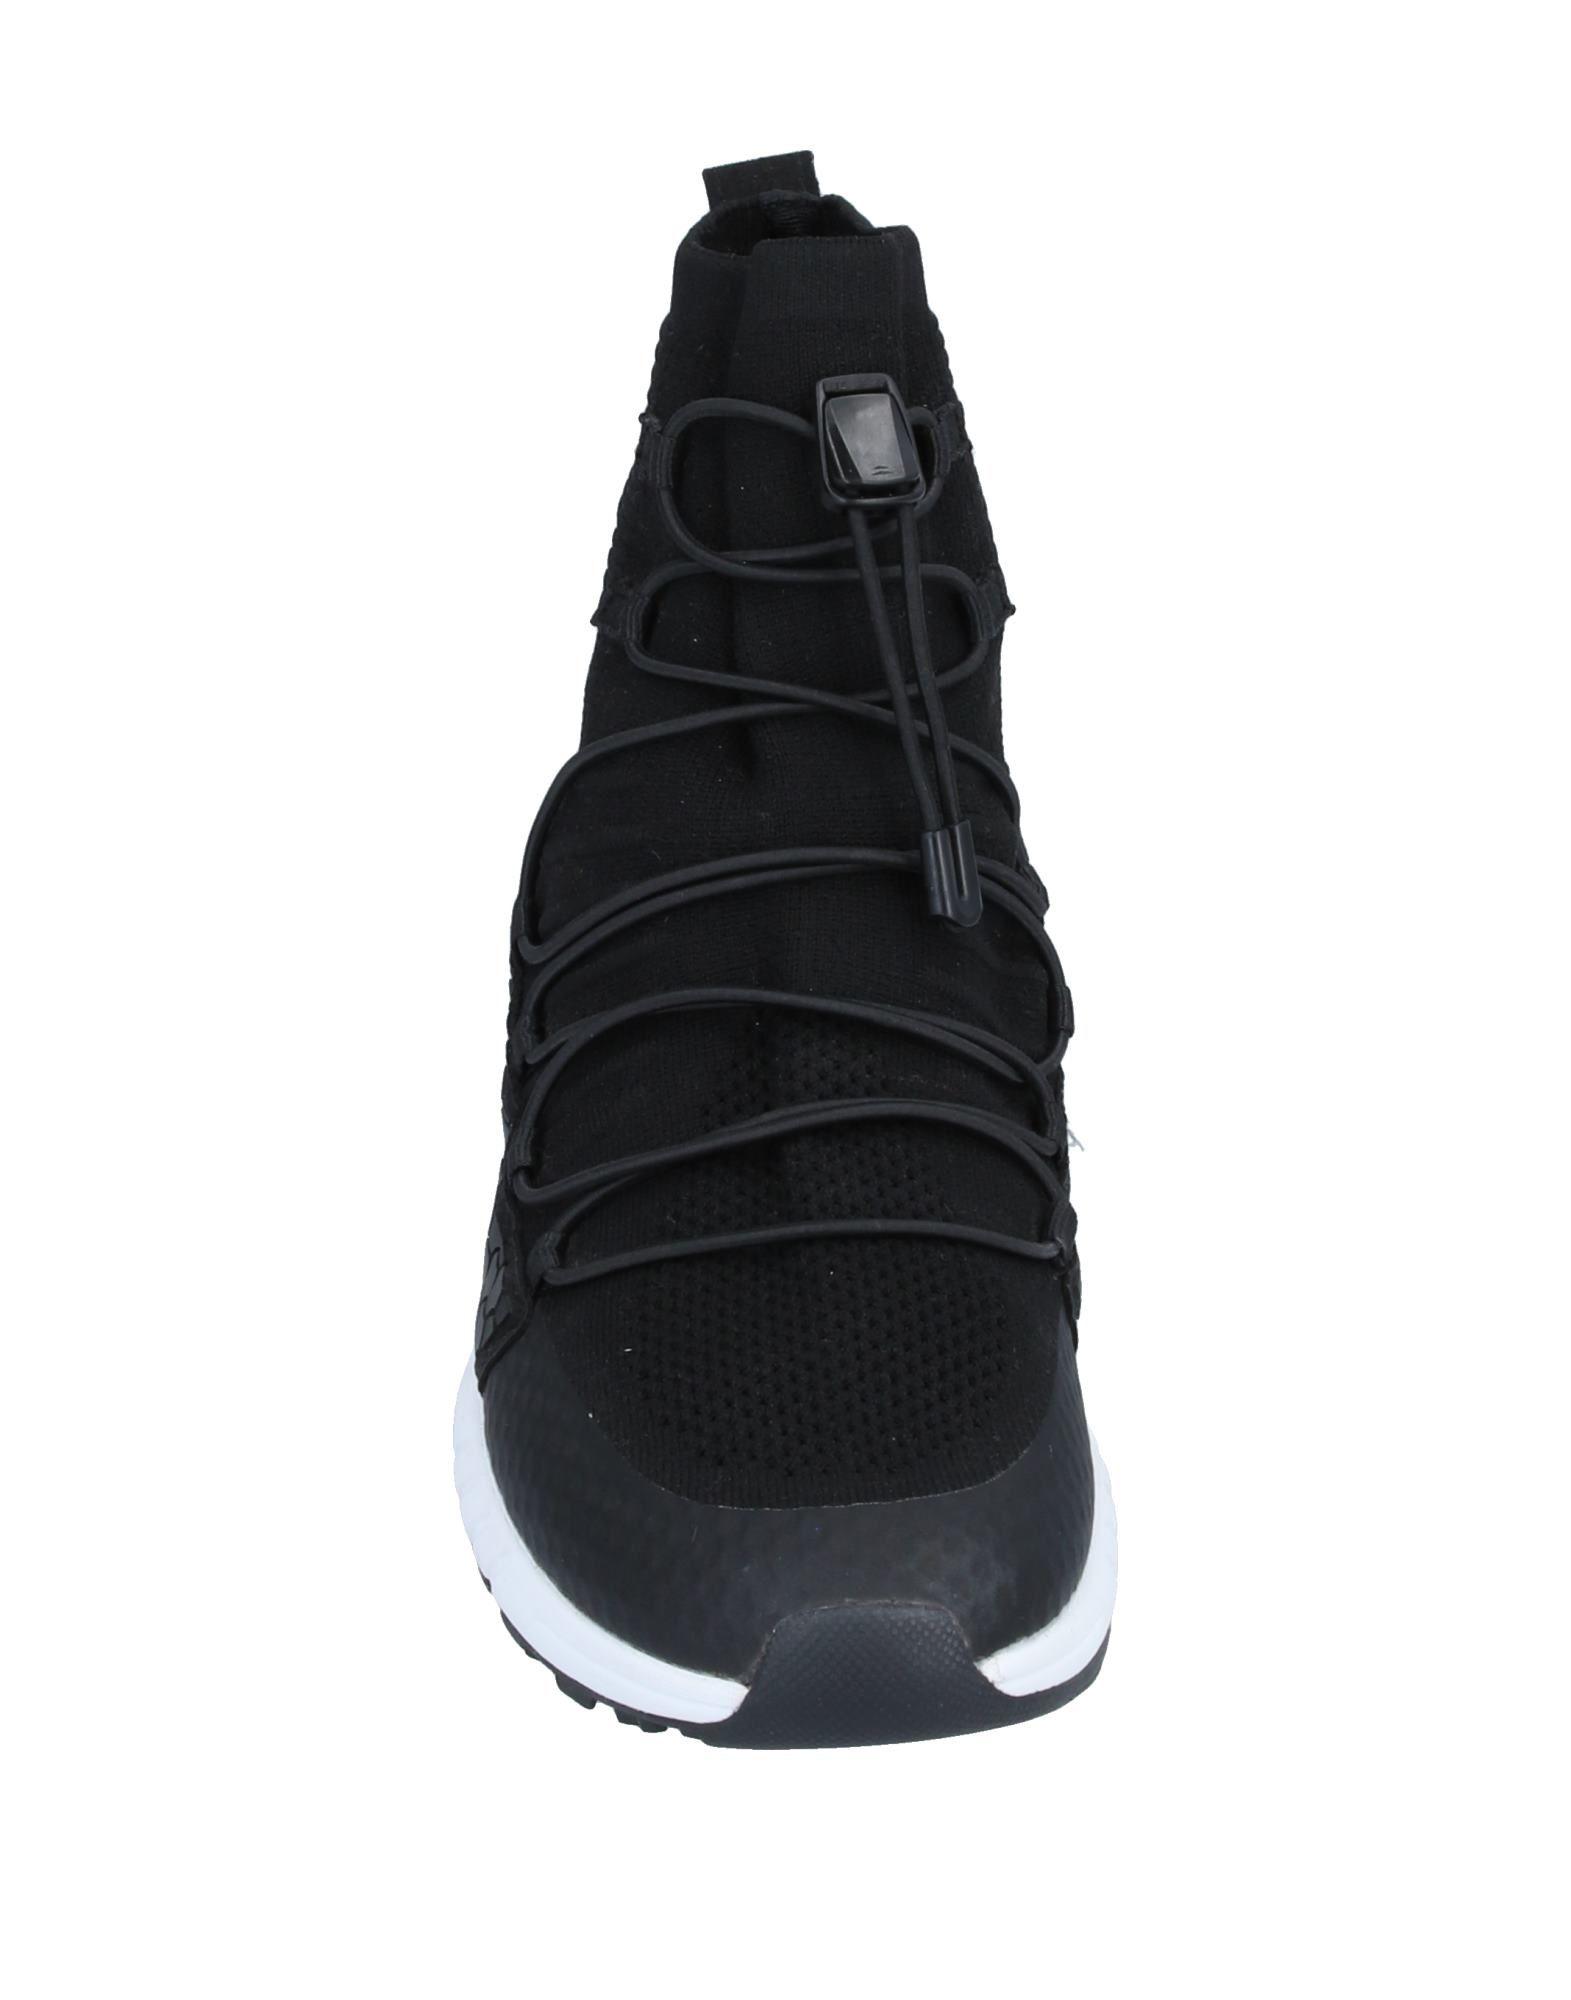 The North Face High-tops & Sneakers in Black for Men - Lyst